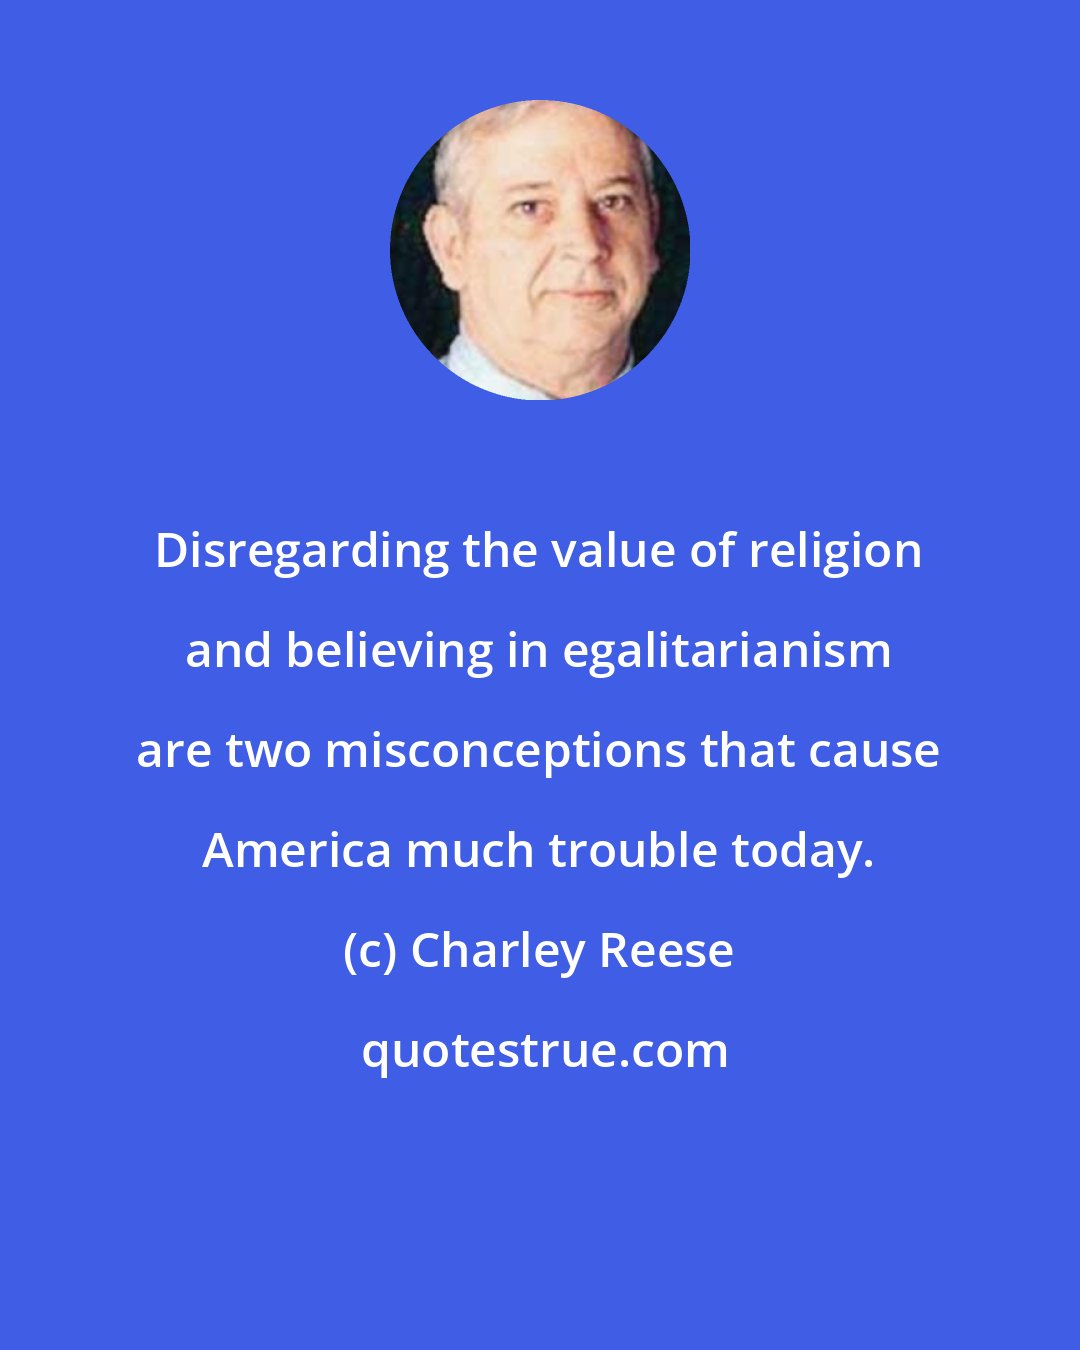 Charley Reese: Disregarding the value of religion and believing in egalitarianism are two misconceptions that cause America much trouble today.